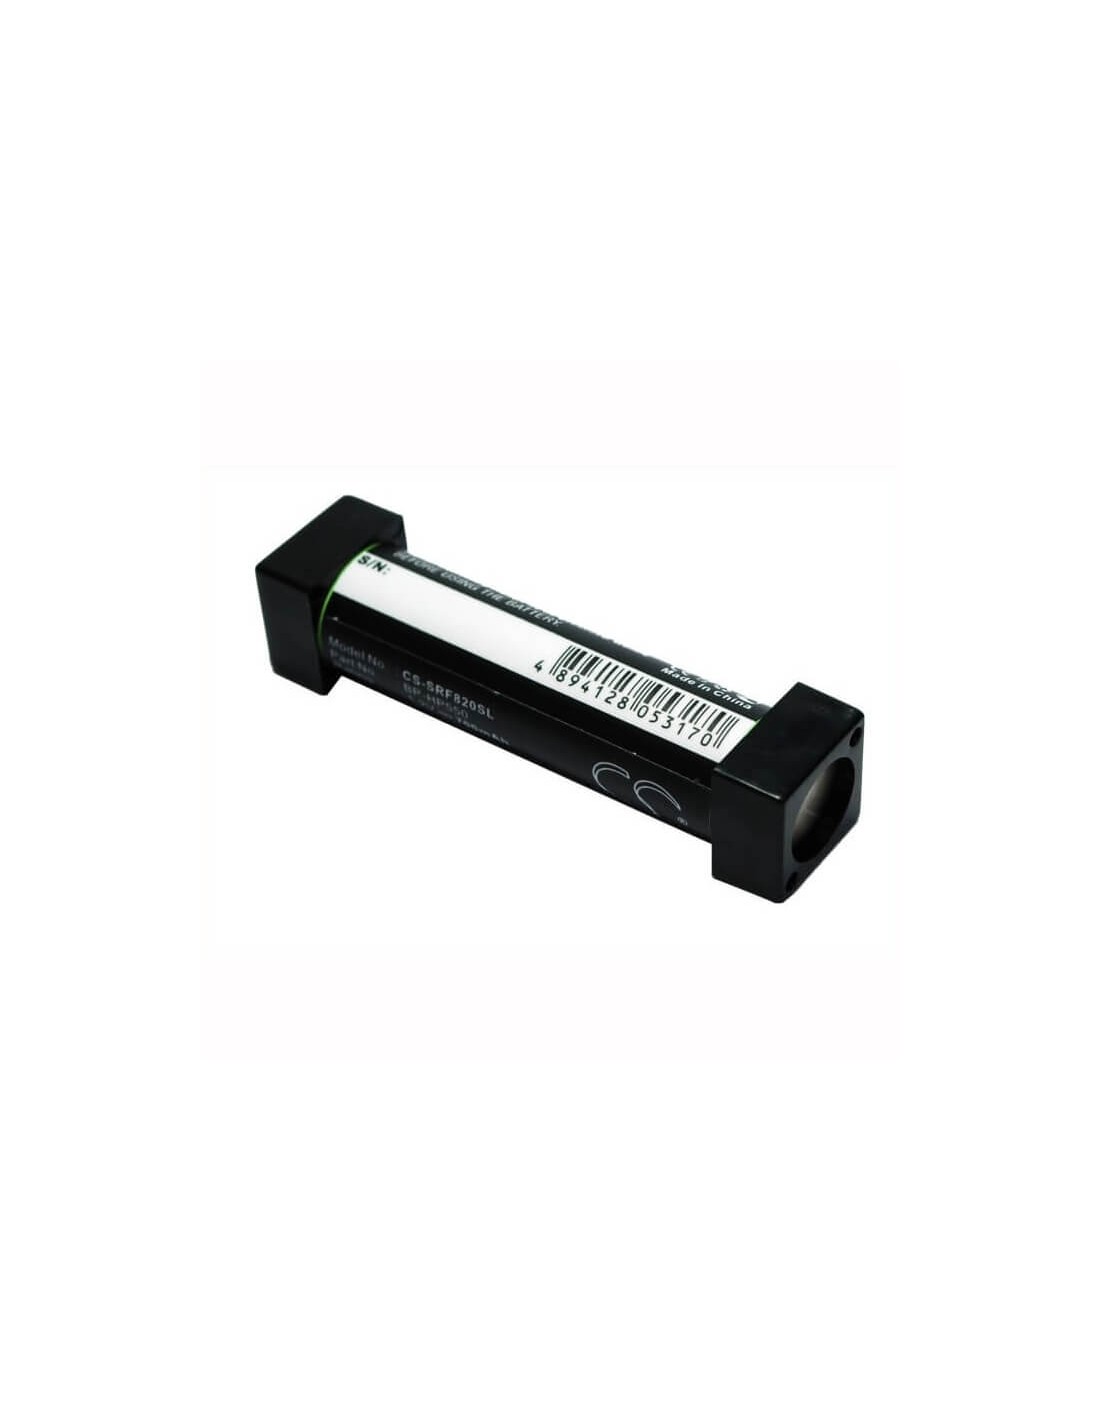 Battery for Sony Mdr-ds3000, Mdr-if240rk, Mdr-if3000 1.2V, 700mAh - 0.84Wh